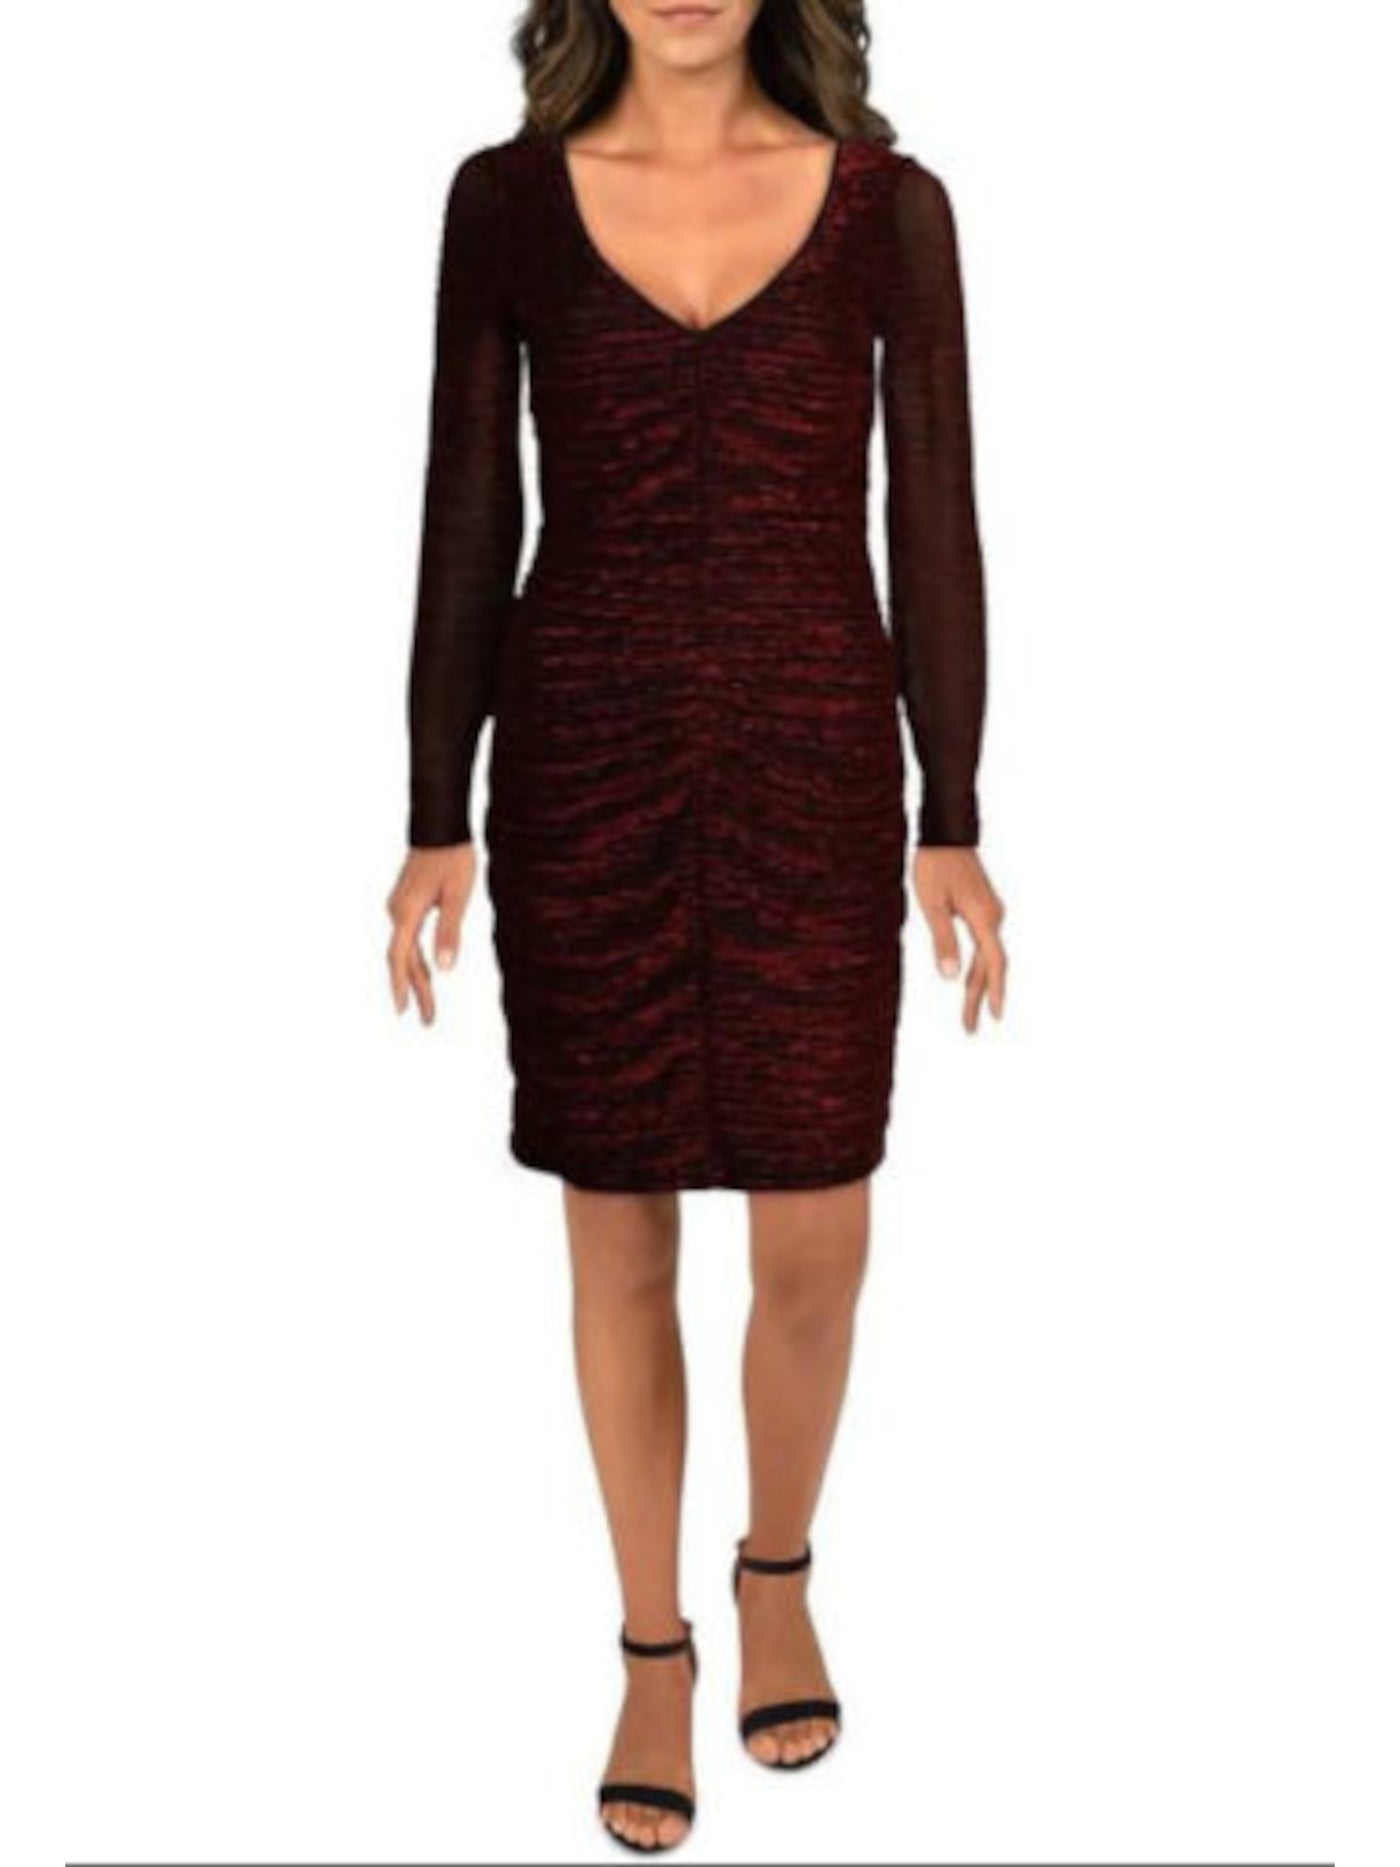 GUESS Womens Red Sheer Long Sleeve V Neck Above The Knee Cocktail Body Con Dress 10